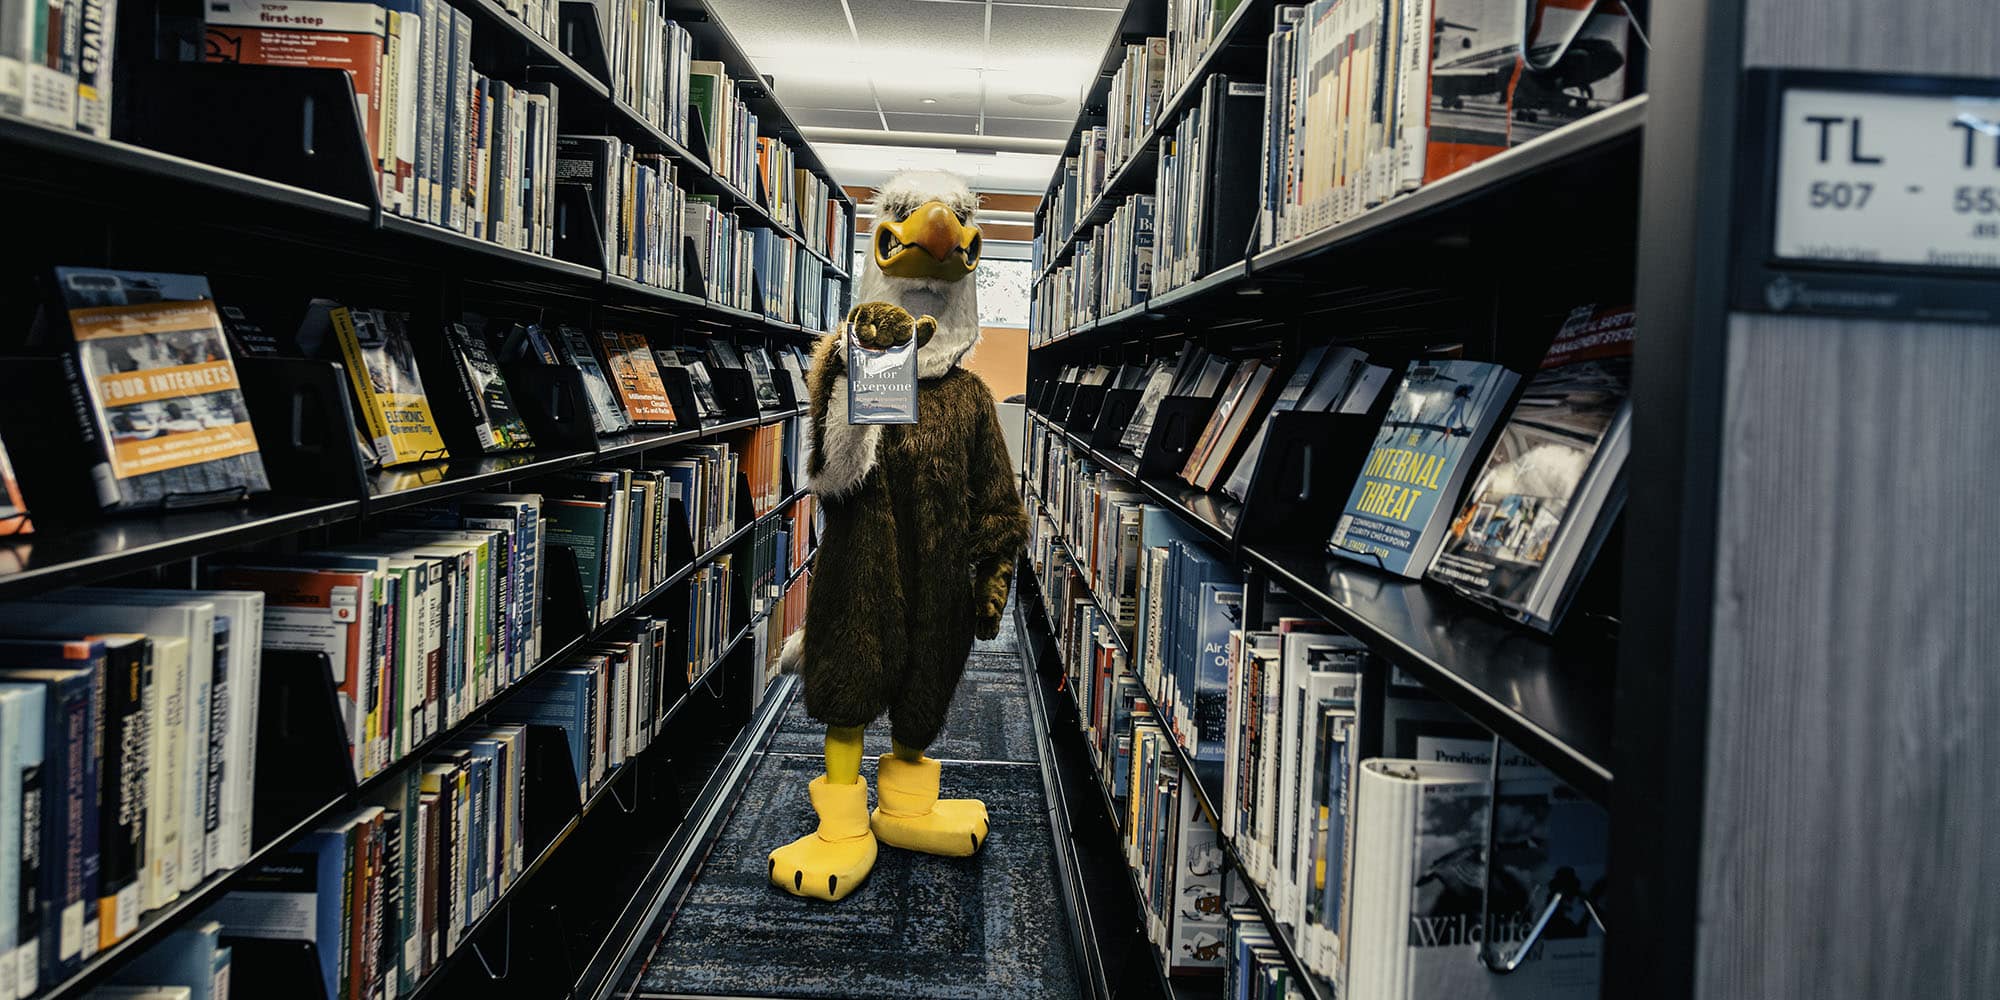 Ernie the Eagle mascot walks down an aisle of bookcases in the library.